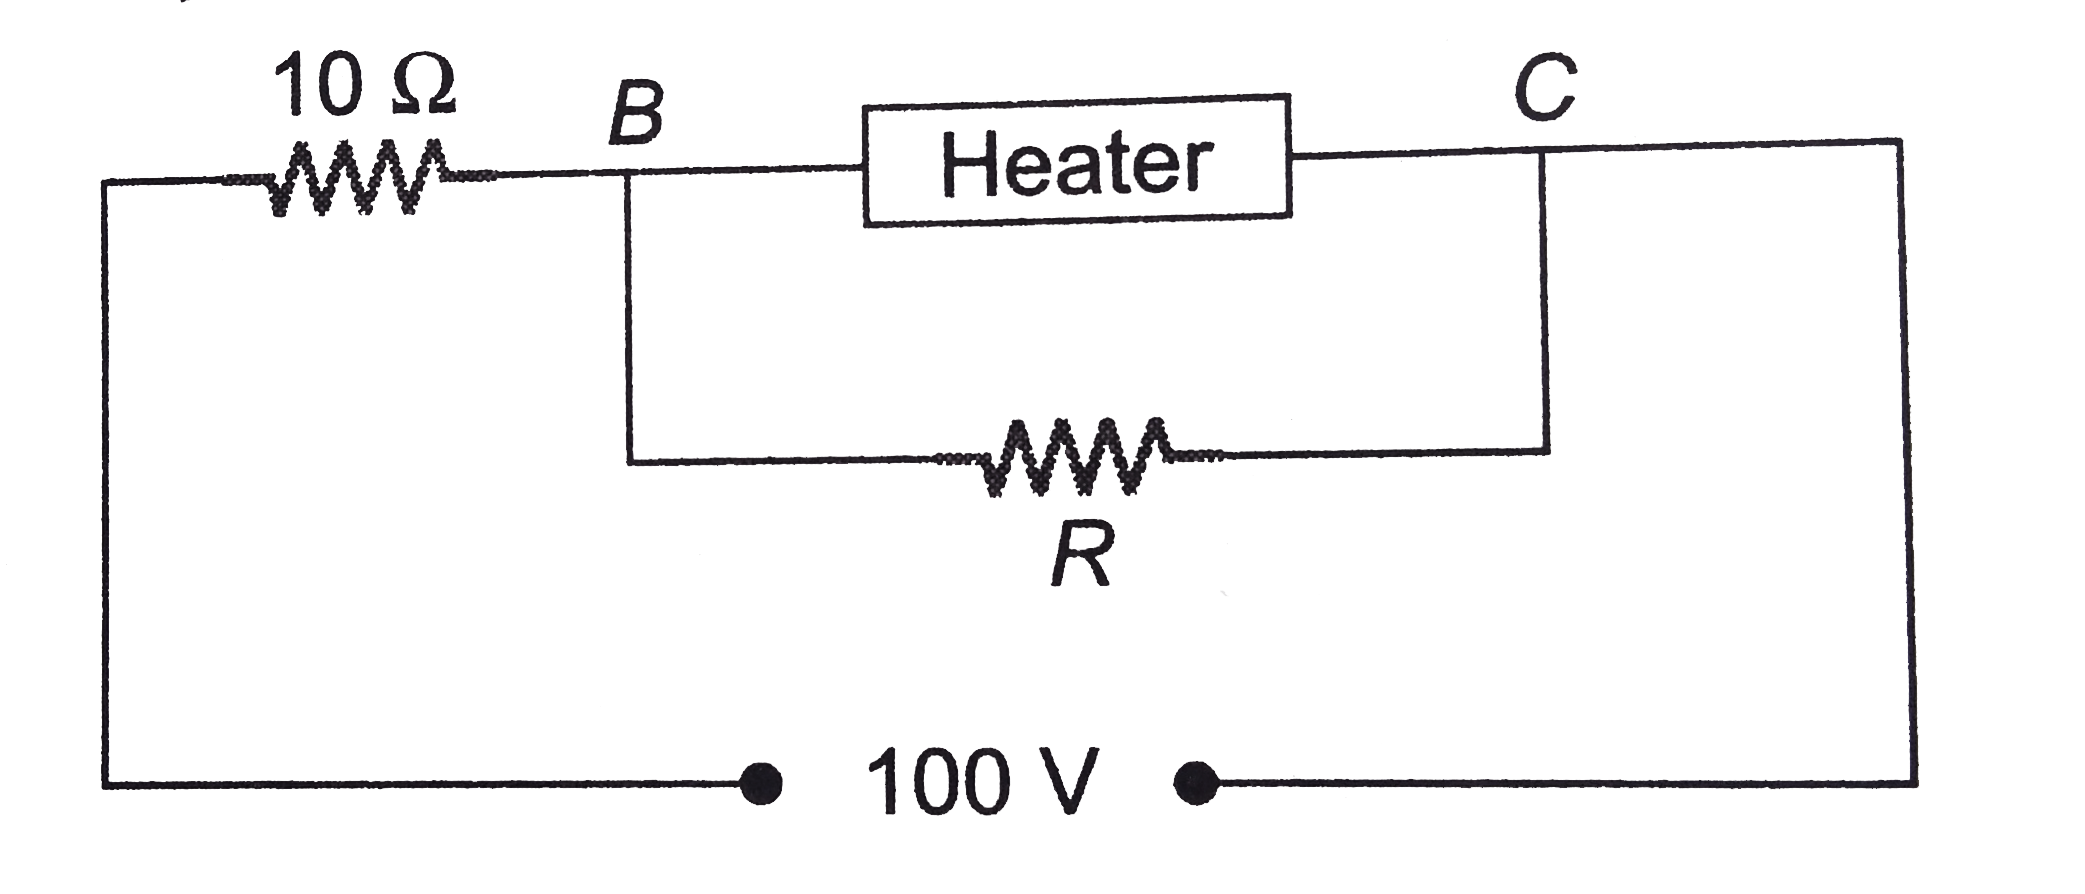 A heater is designed to operate with a power of 1000W in a 100 V line. It is connected in combination with  a resistance of 10 Omega and a resistance R, to a 100 V mains as shown in figure. What will be the value of R so that the heater operates with a power of 62.5W?